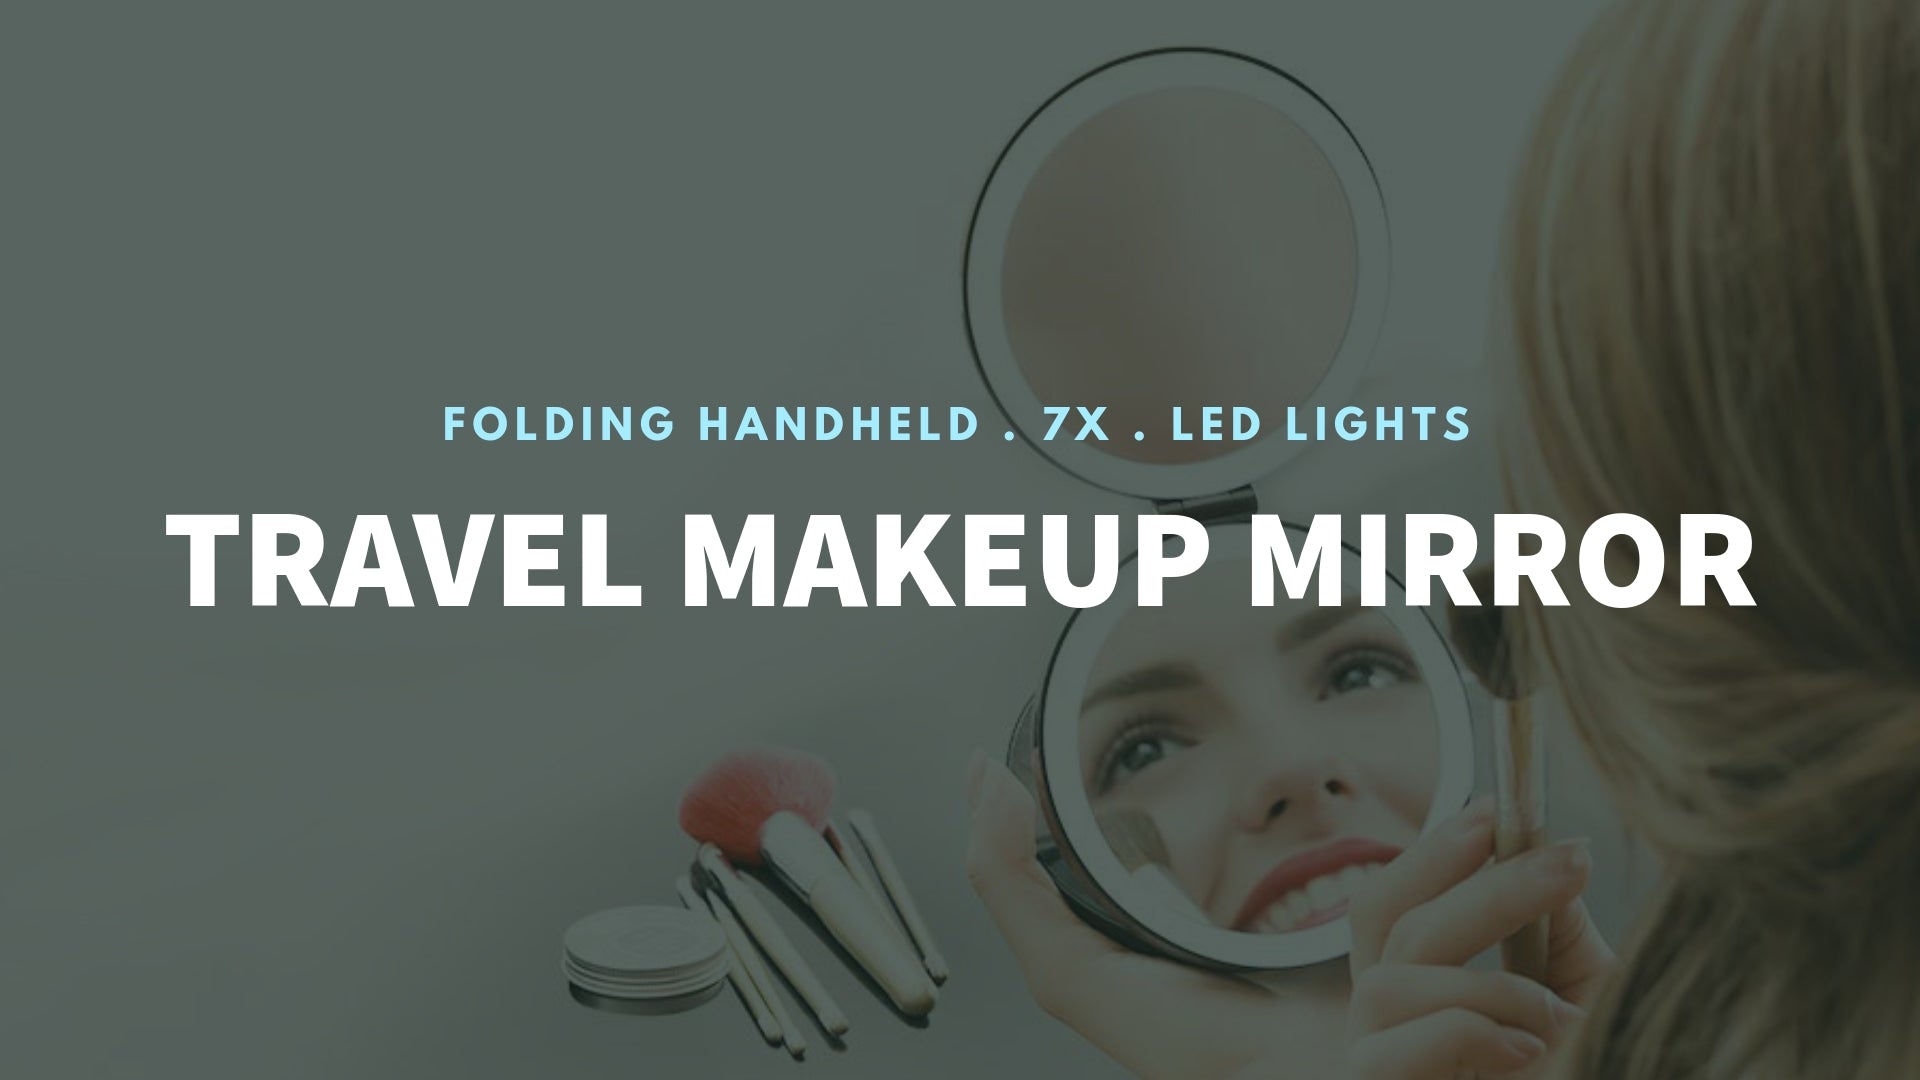 LED Lighted 3-fold Travel Compact Makeup Mirror 1X/7X Magnification magnifying mirror standing makeup magnifying bathroom s with lights trifold battery magnifying glass absolutely lush best hand zadro round makeup jerdon makeup reviews natural makeup estala hollywood vanity fancii travel makeup gala 10x magnifying makeup bestmakeup makeup with lights best ratedmakeup anjou makeup kensie vanity vanity with lights tri fold vanity wall mounted makeup banner - iMartCity